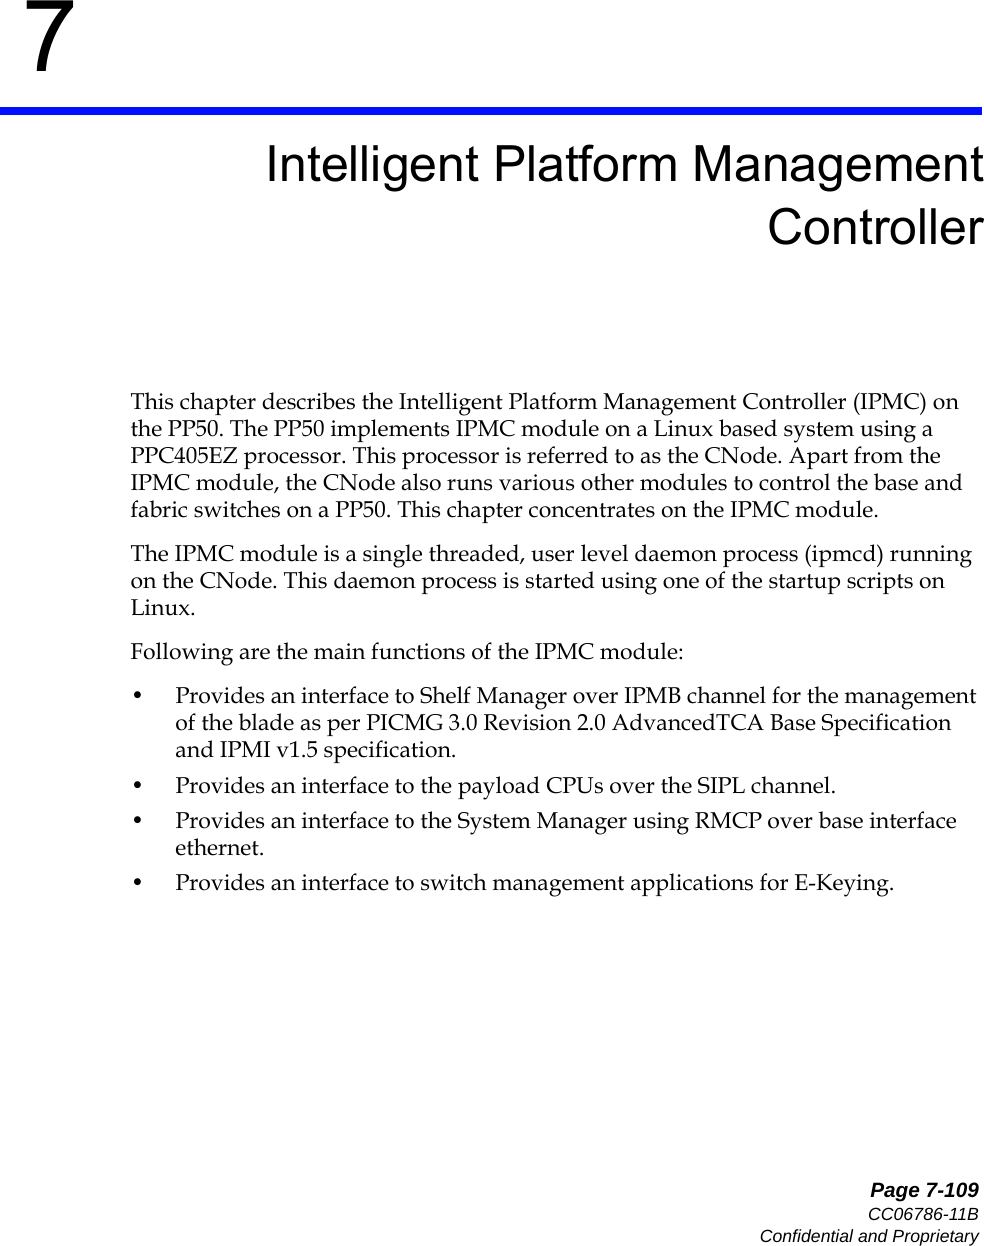   Page 7-109CC06786-11BConfidential and Proprietary7Preliminary7Intelligent Platform ManagementControllerThis chapter describes the Intelligent Platform Management Controller (IPMC) on the PP50. The PP50 implements IPMC module on a Linux based system using a PPC405EZ processor. This processor is referred to as the CNode. Apart from the IPMC module, the CNode also runs various other modules to control the base and fabric switches on a PP50. This chapter concentrates on the IPMC module.The IPMC module is a single threaded, user level daemon process (ipmcd) running on the CNode. This daemon process is started using one of the startup scripts on Linux. Following are the main functions of the IPMC module:• Provides an interface to Shelf Manager over IPMB channel for the management of the blade as per PICMG 3.0 Revision 2.0 AdvancedTCA Base Specification and IPMI v1.5 specification.• Provides an interface to the payload CPUs over the SIPL channel.• Provides an interface to the System Manager using RMCP over base interface ethernet.• Provides an interface to switch management applications for E-Keying.